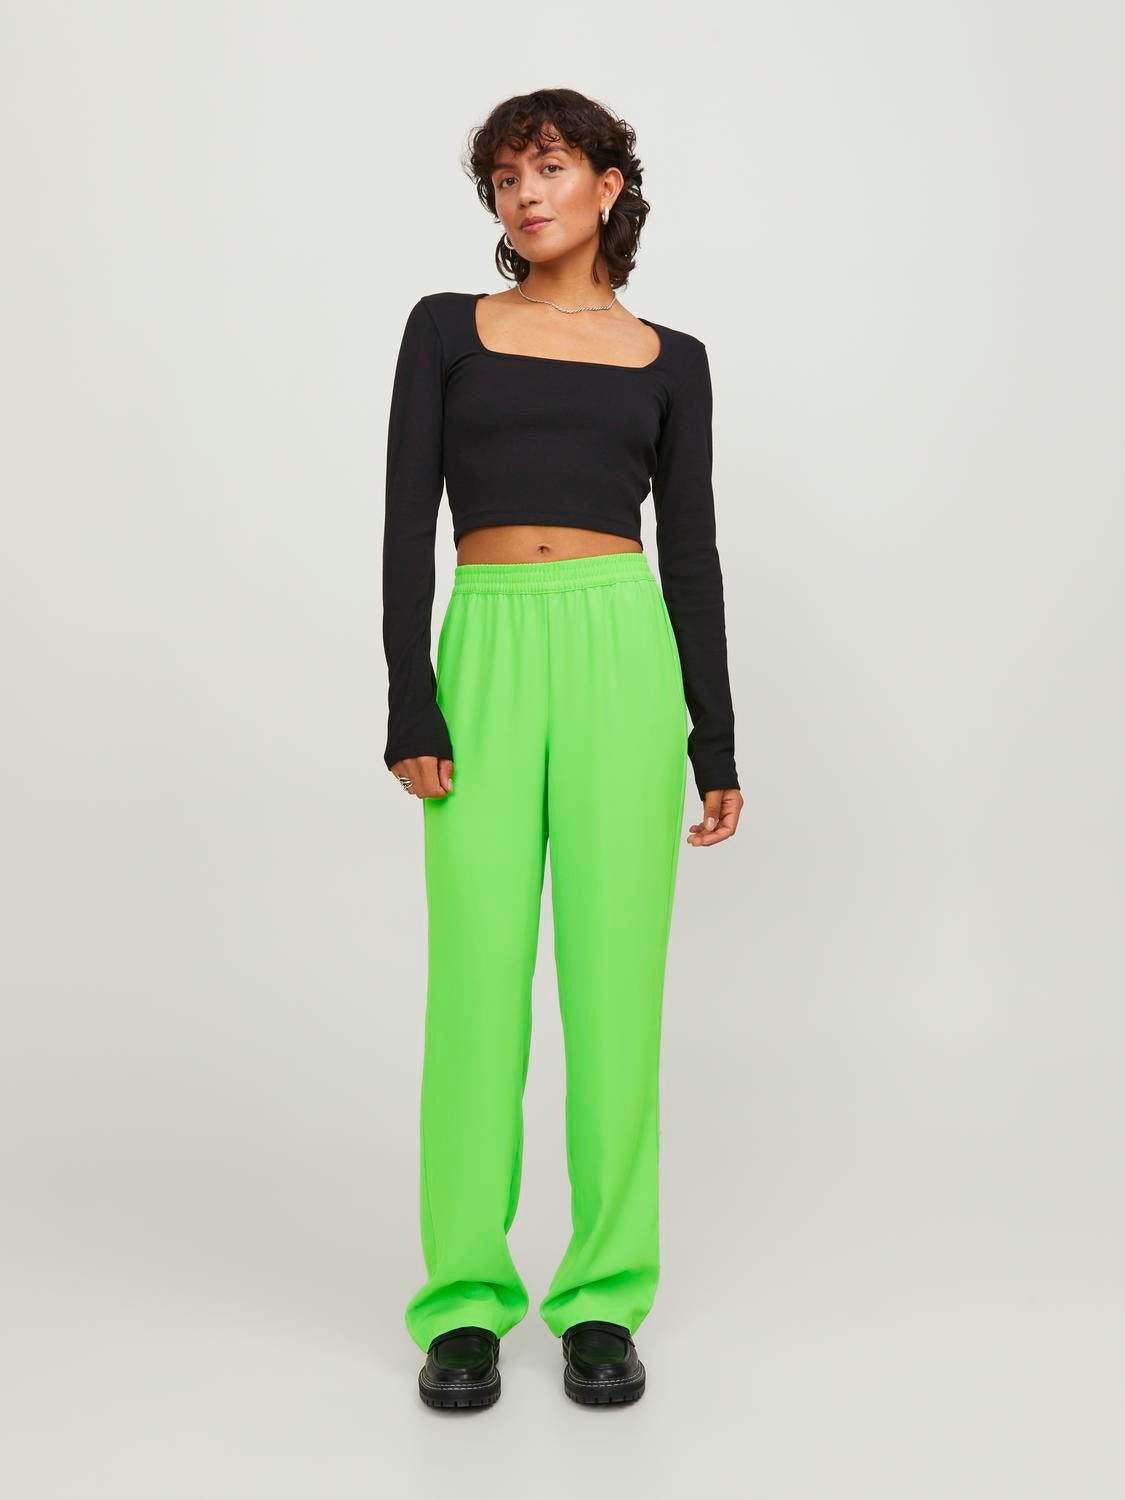 Neon yellow worker trousers for children at karnevalswierts.com